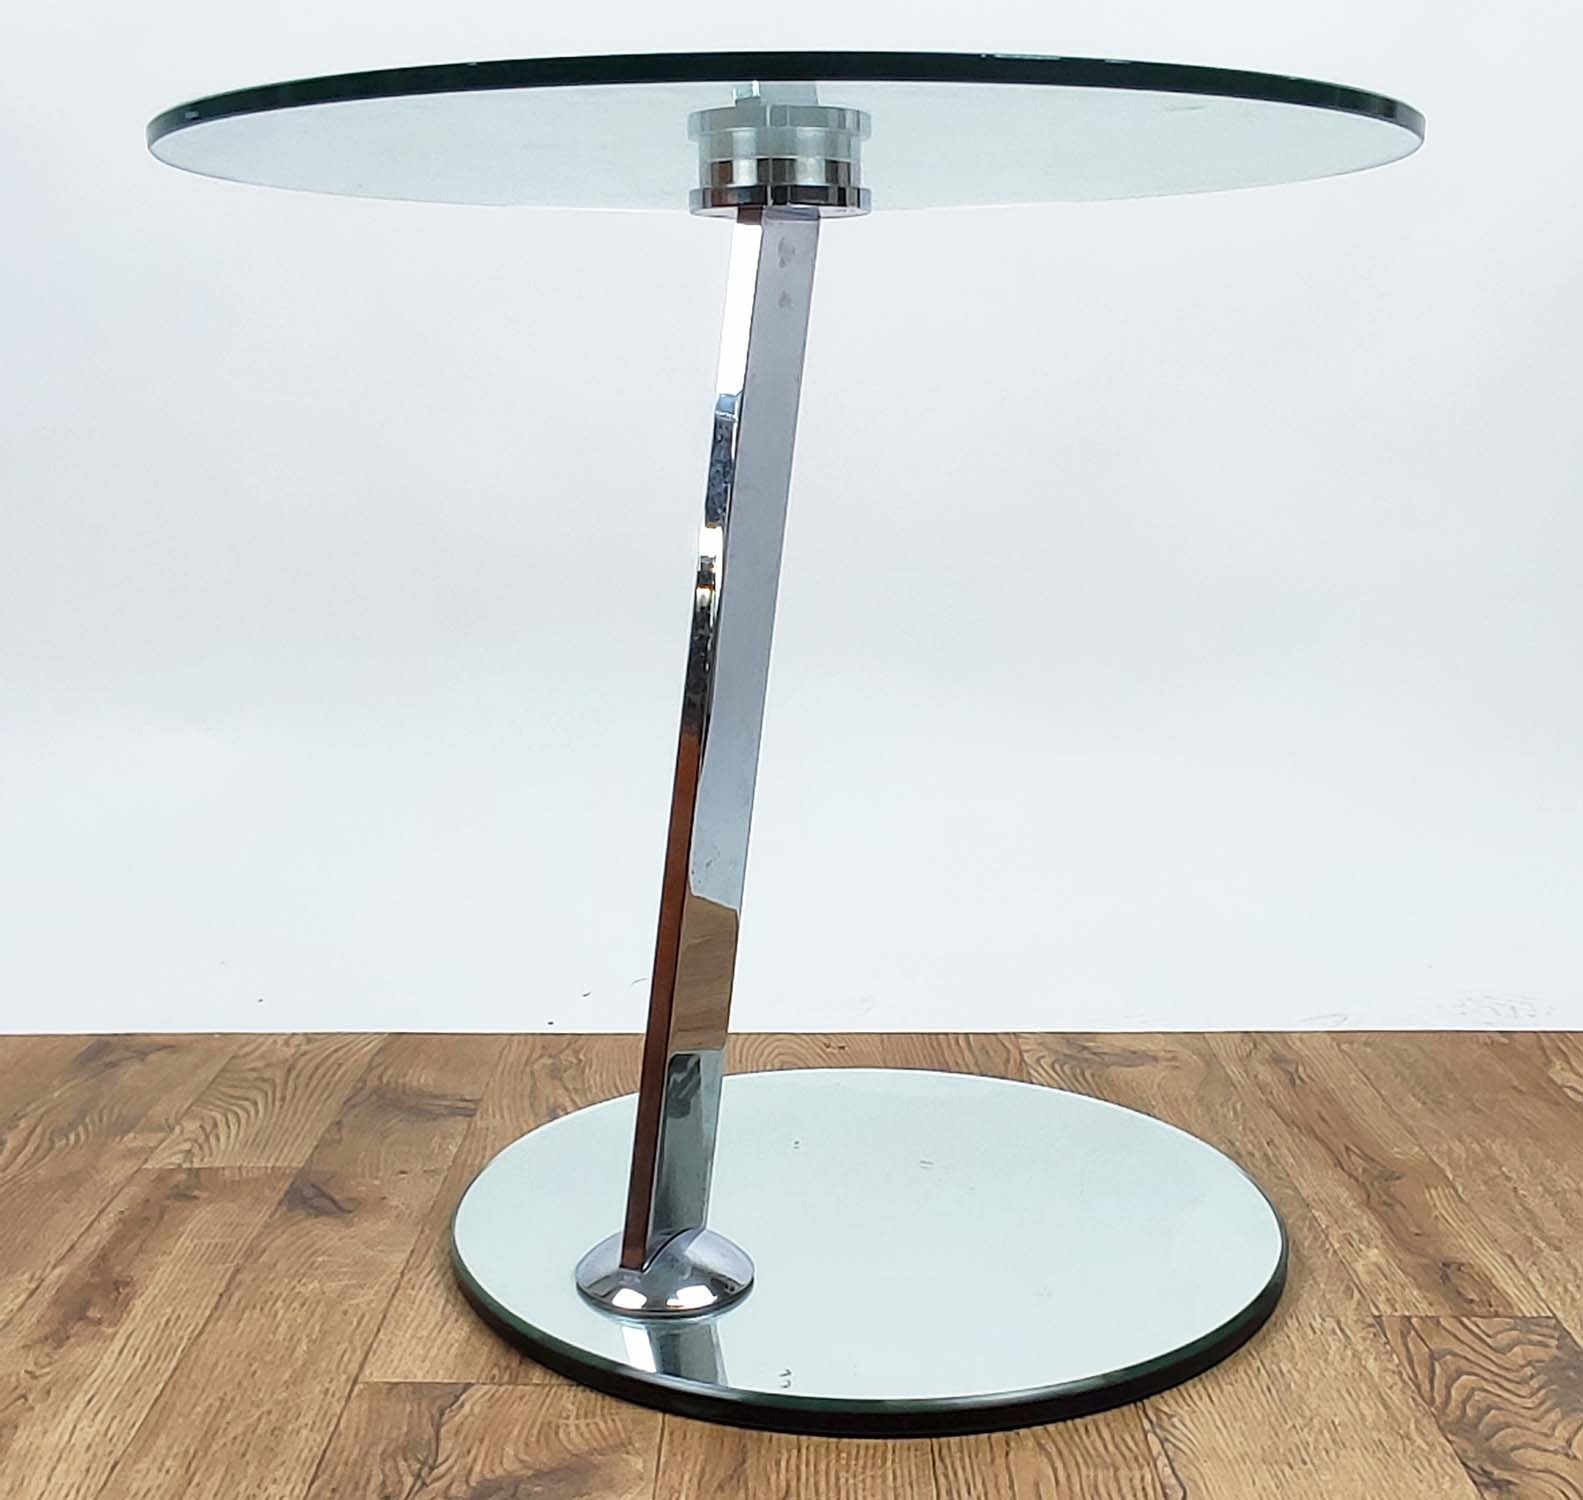 SIDE TABLE, contemporary design, mirrored base, glass top, 60cm diam x 55cm H. - Image 2 of 6